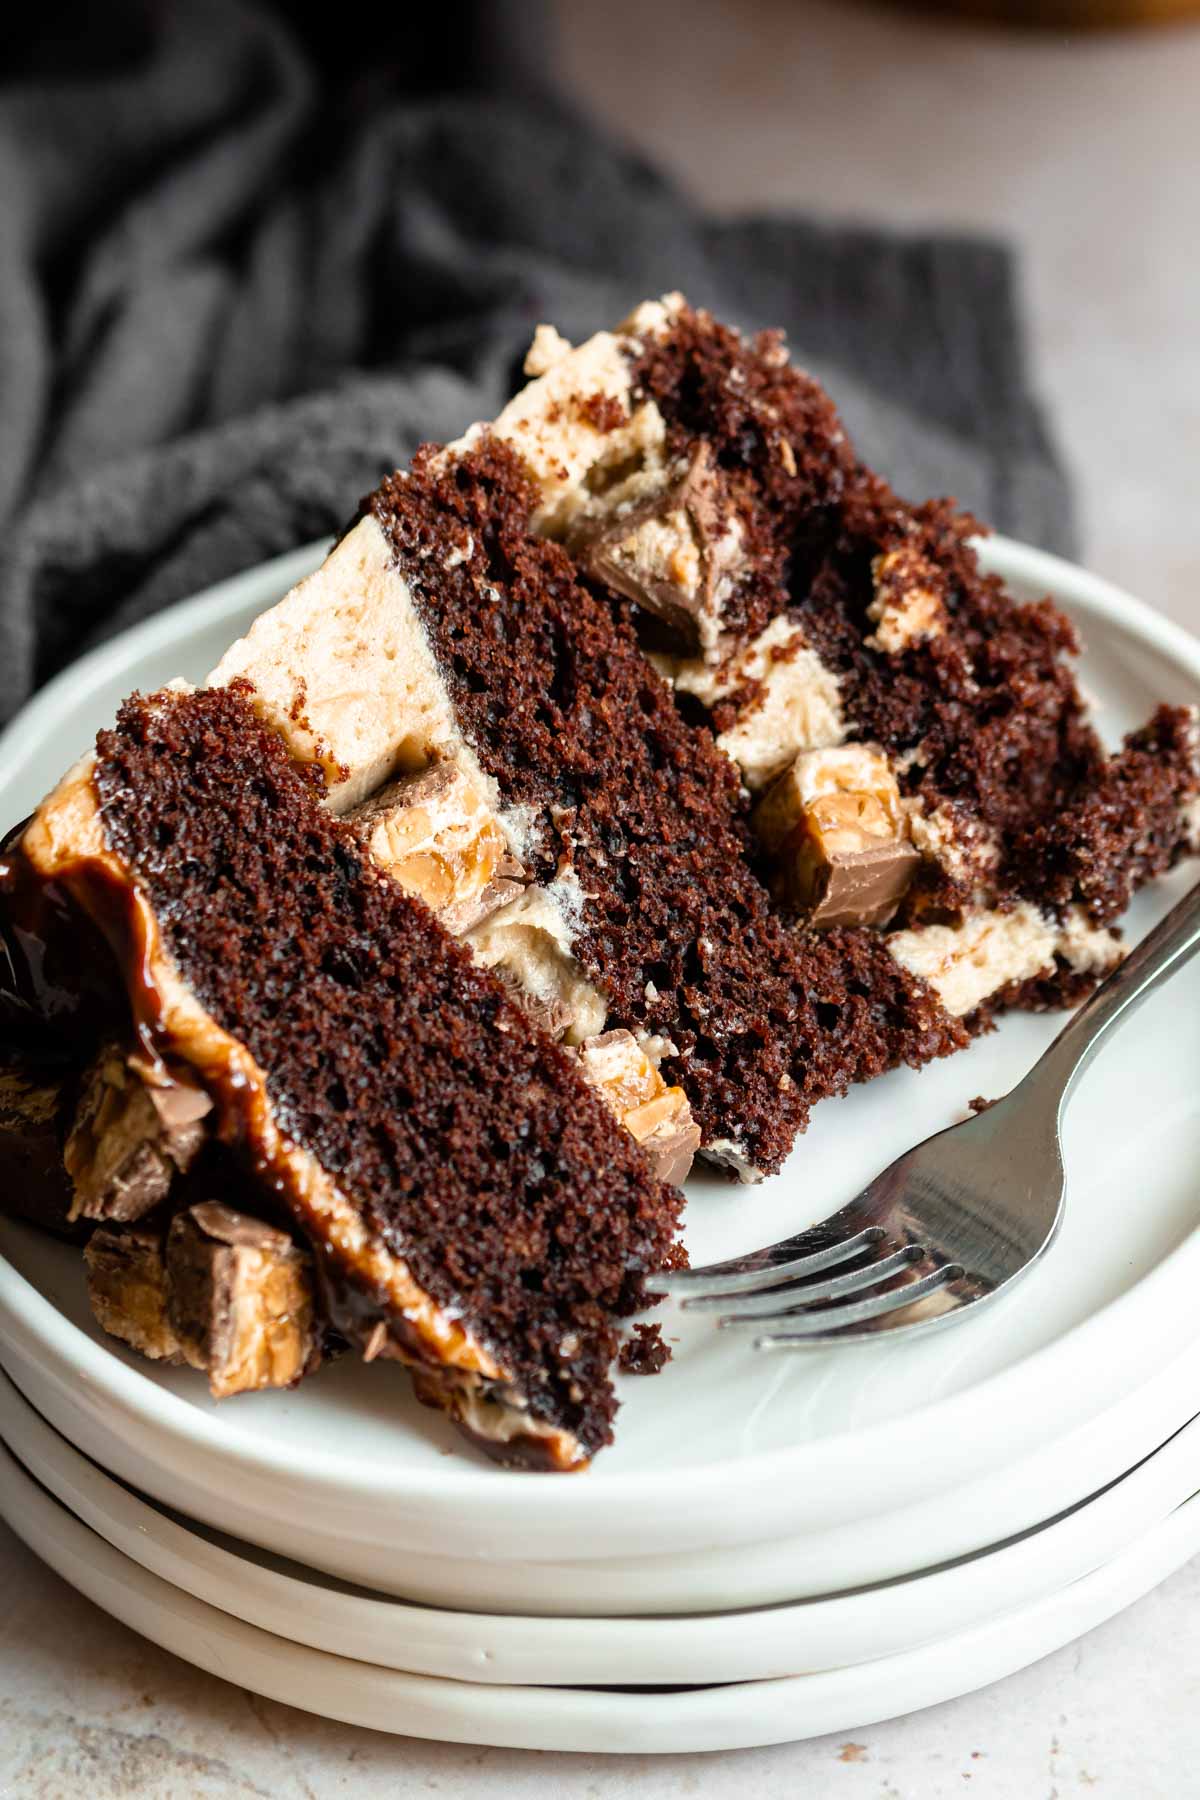 Slice of snickers cake on a stack of white plates.